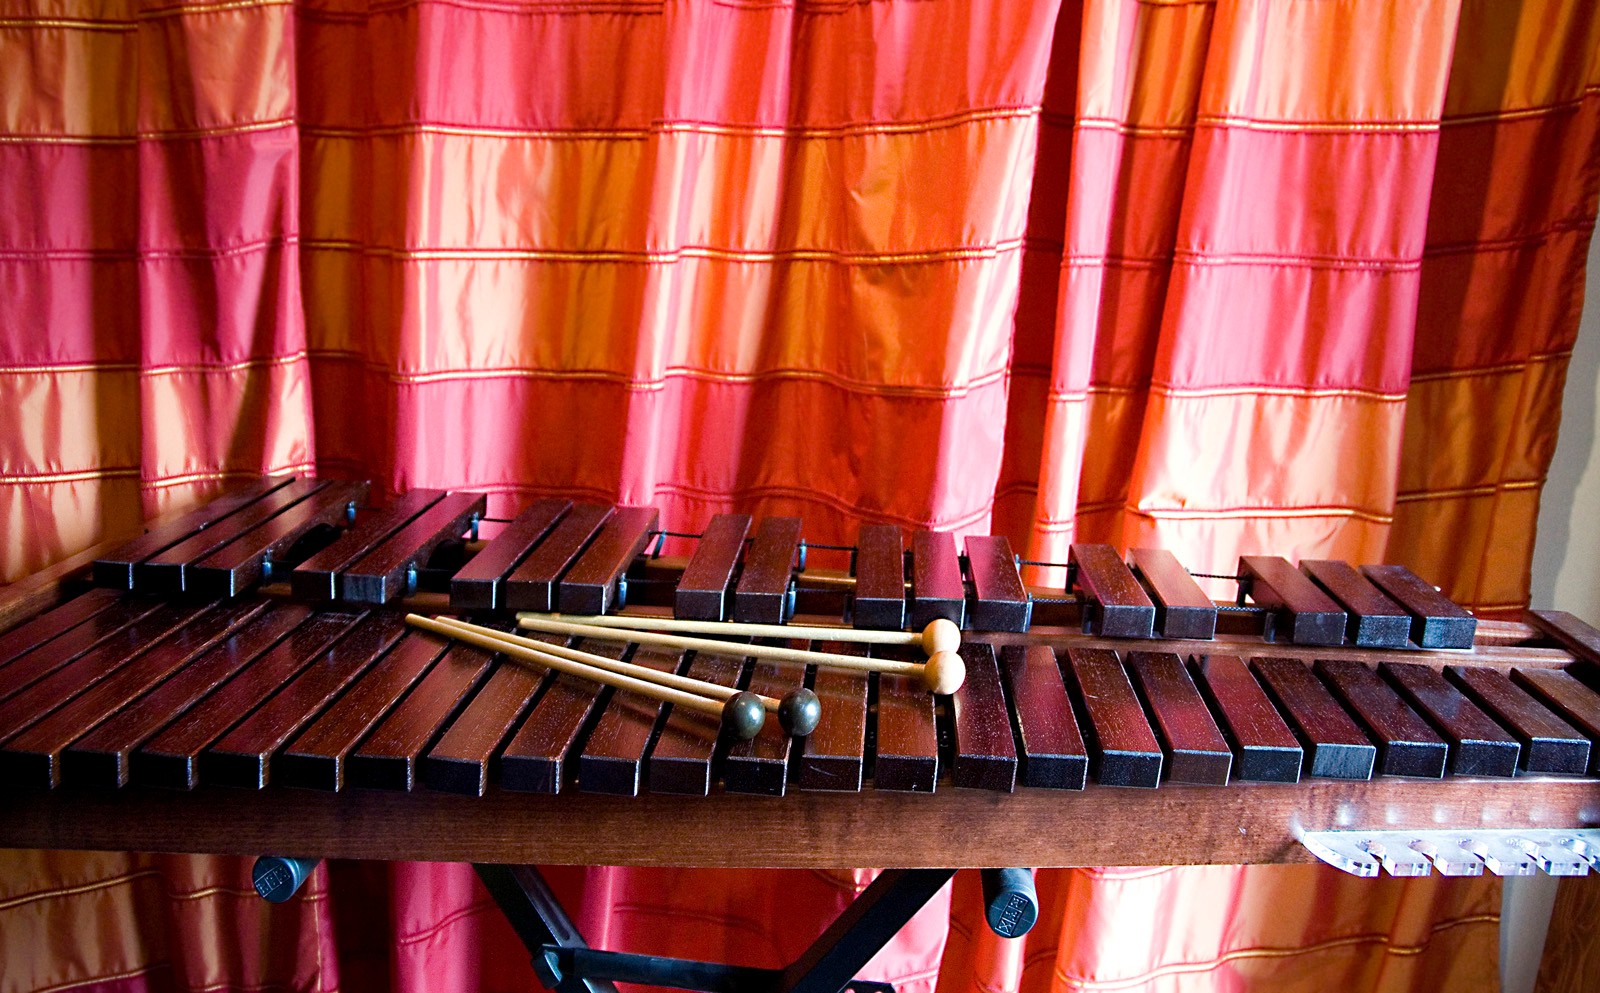 The sound characteristics of the xylophone